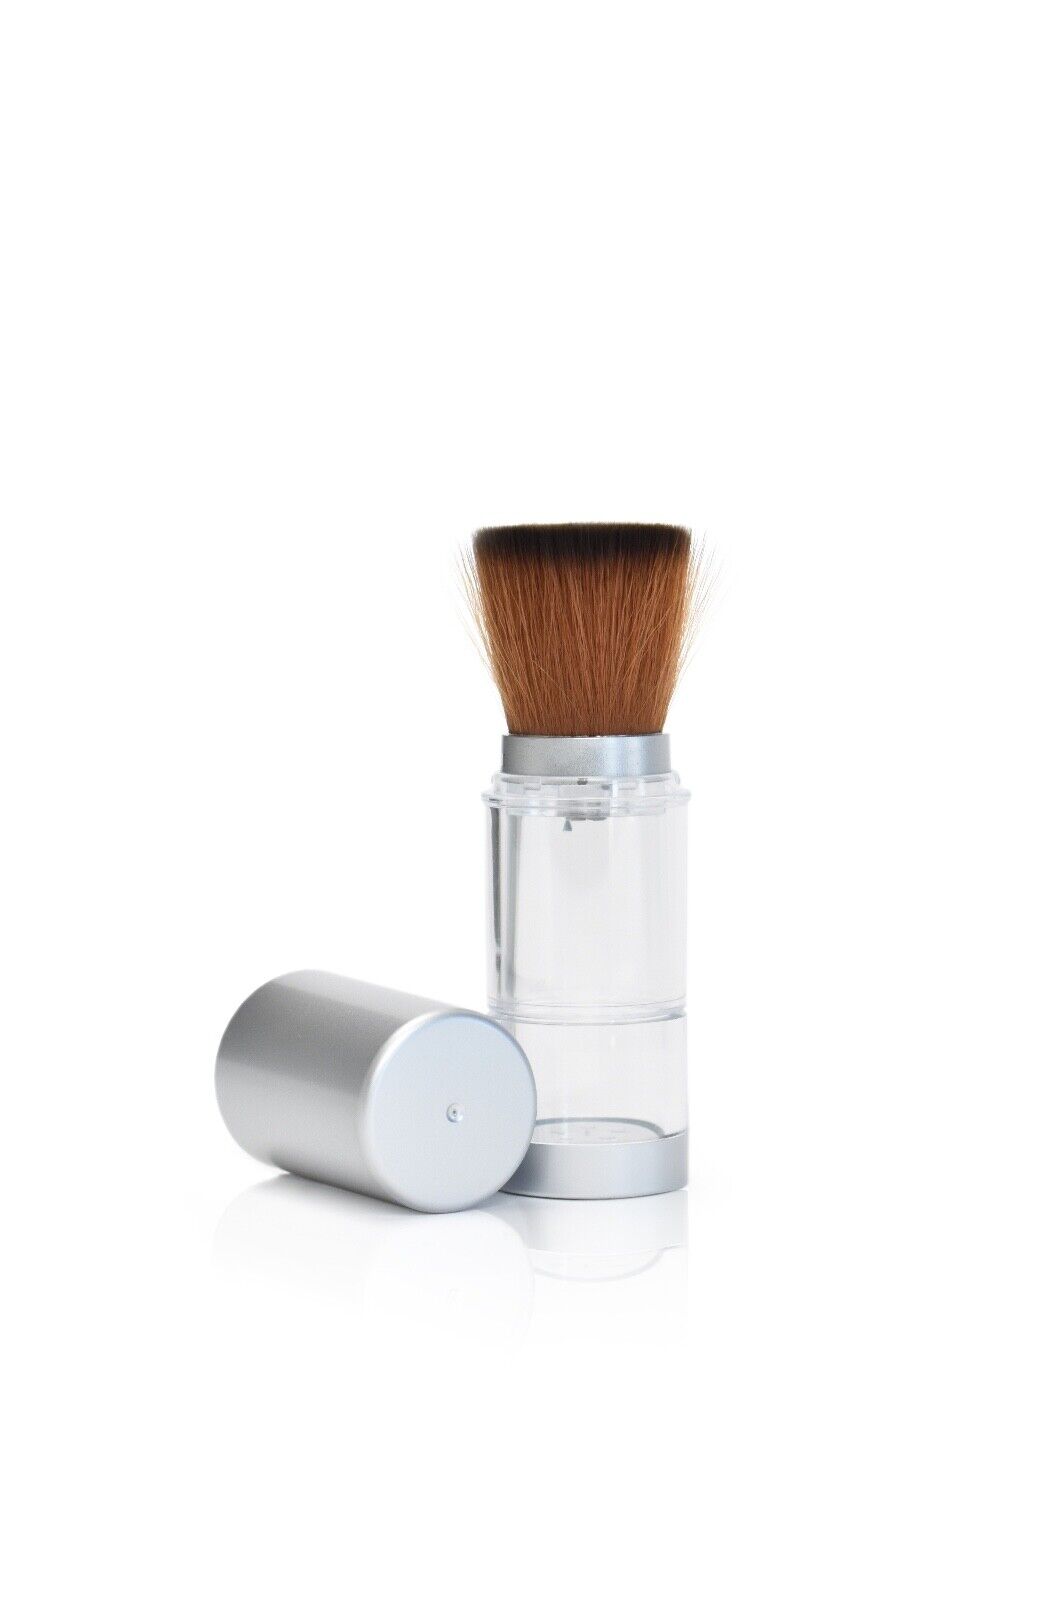 Refillable Powder Brush (One, empty) for any makeup or sunscreen | eBay